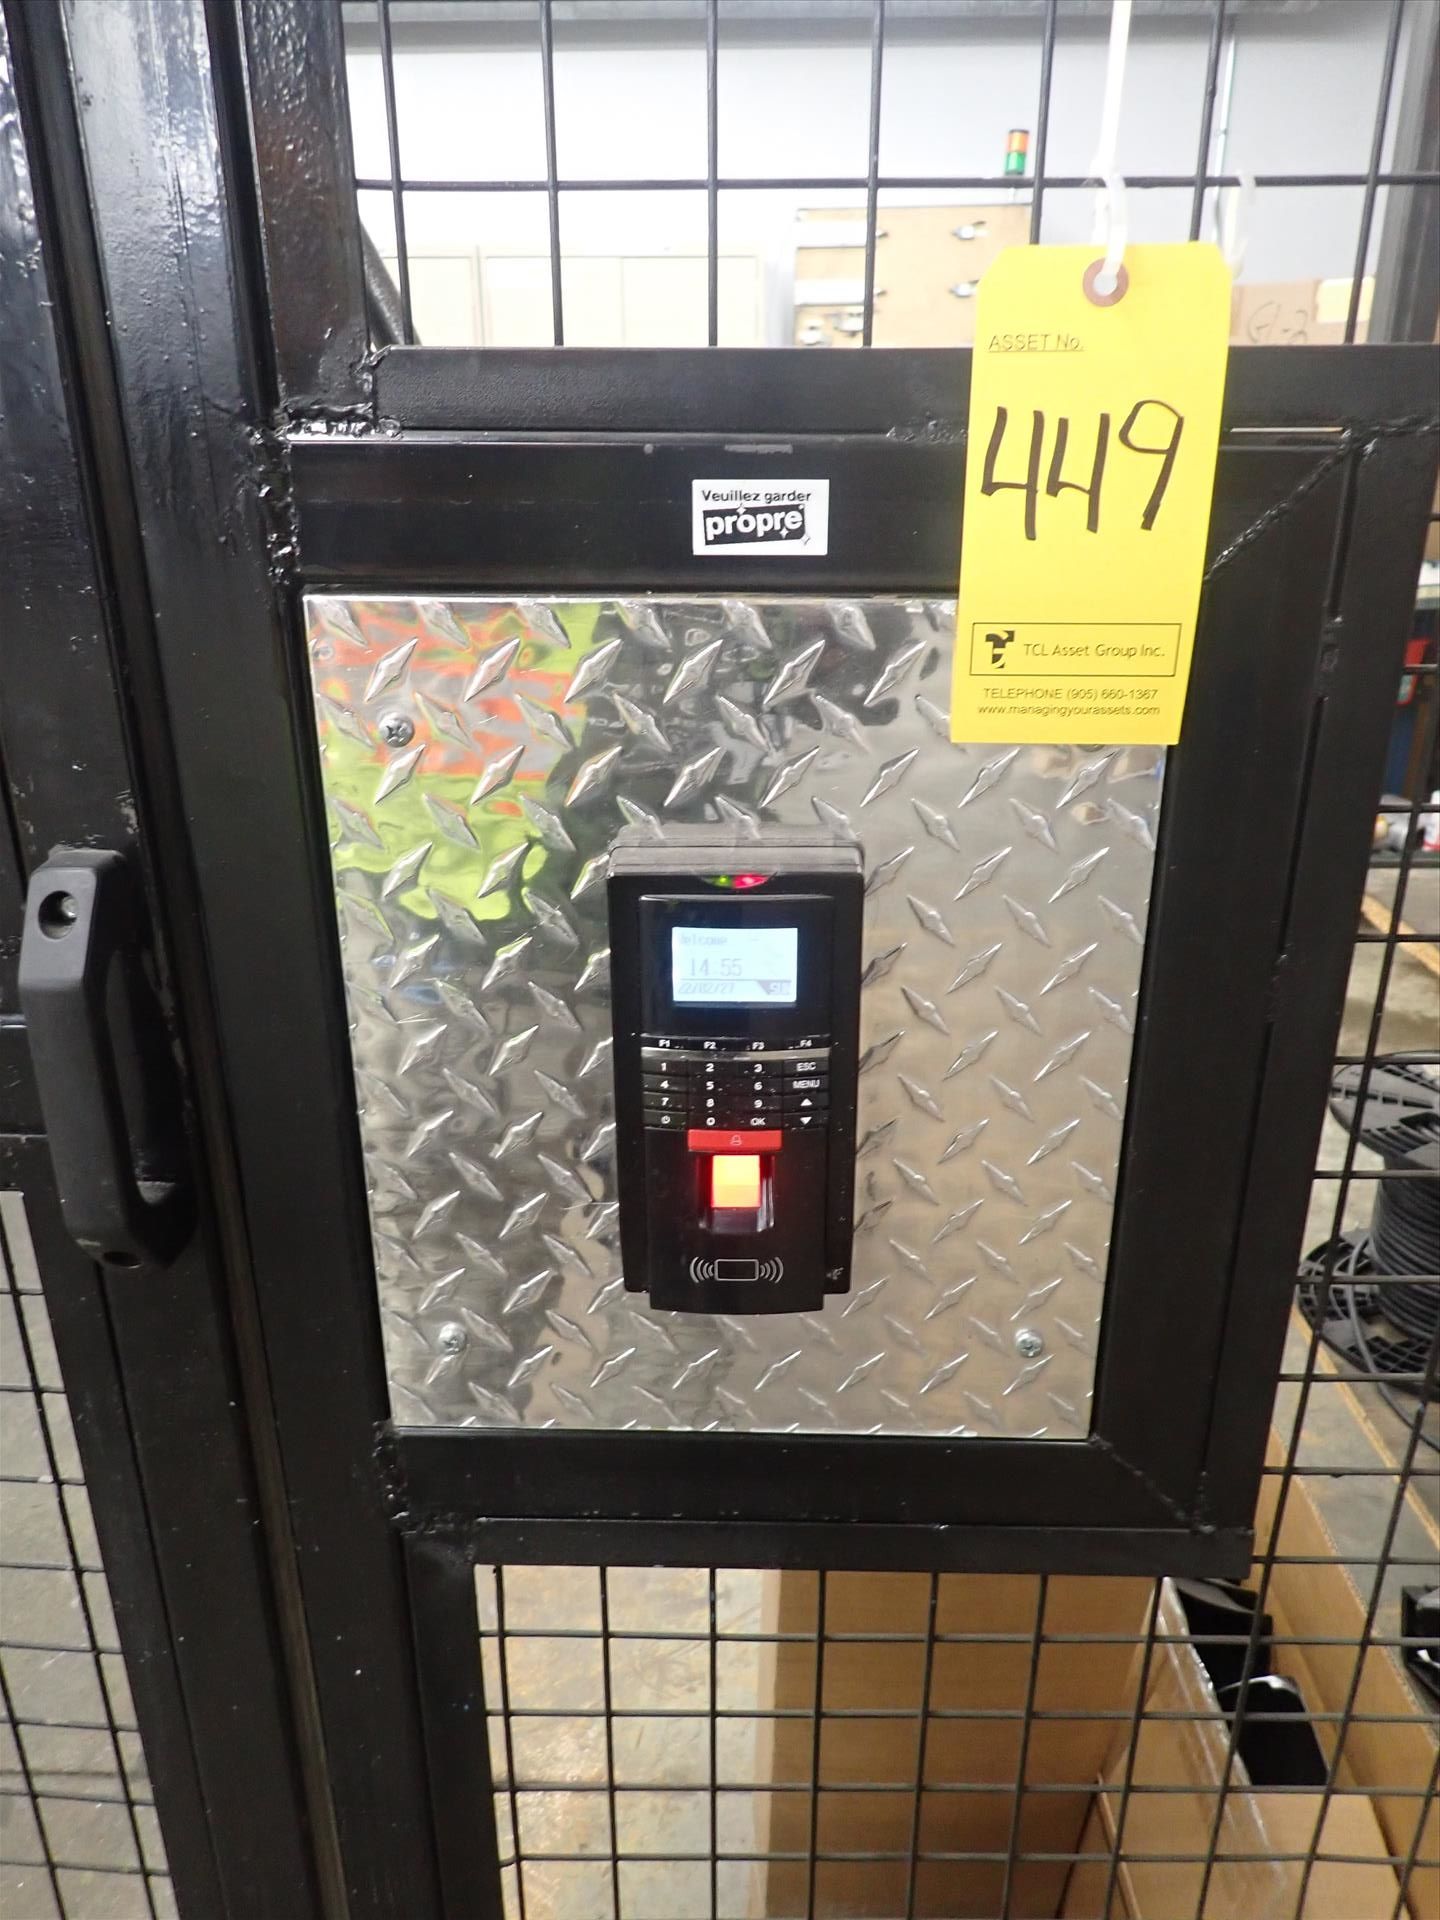 security cage, 2-sided, approx. 16 ft x 16 ft, w/ digital access pad - Image 2 of 2